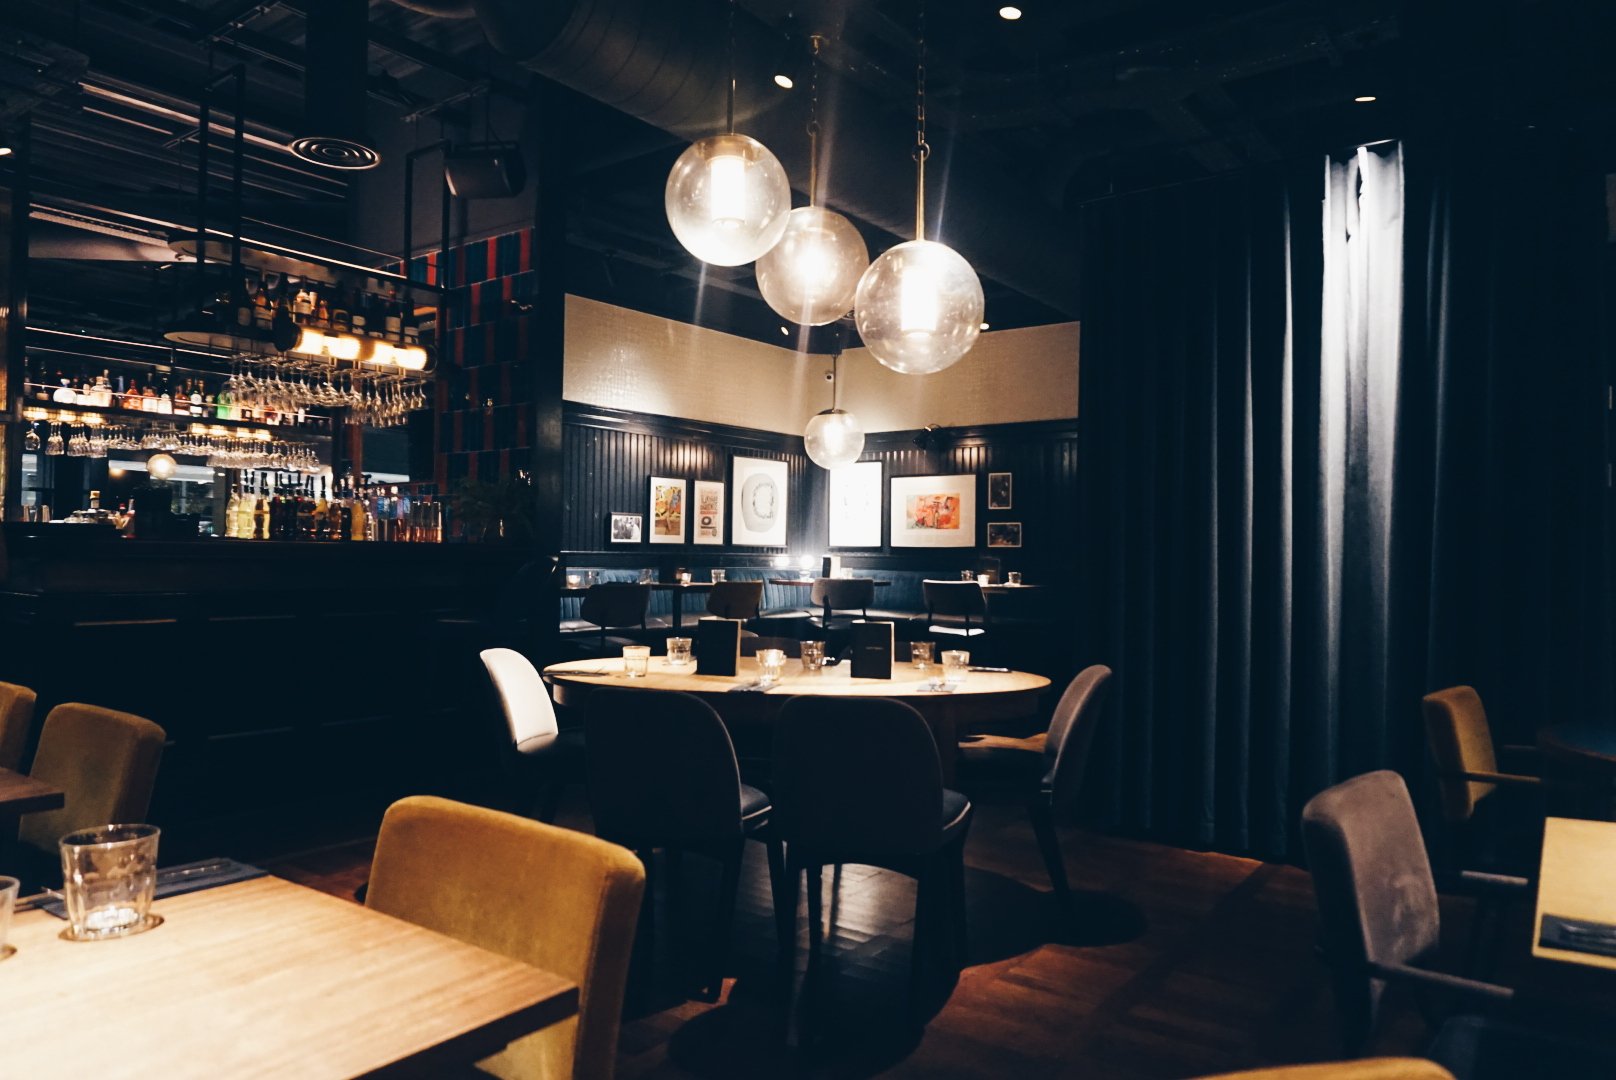 Dirty Bones Oxford review - interior dining area | The LDN Gal